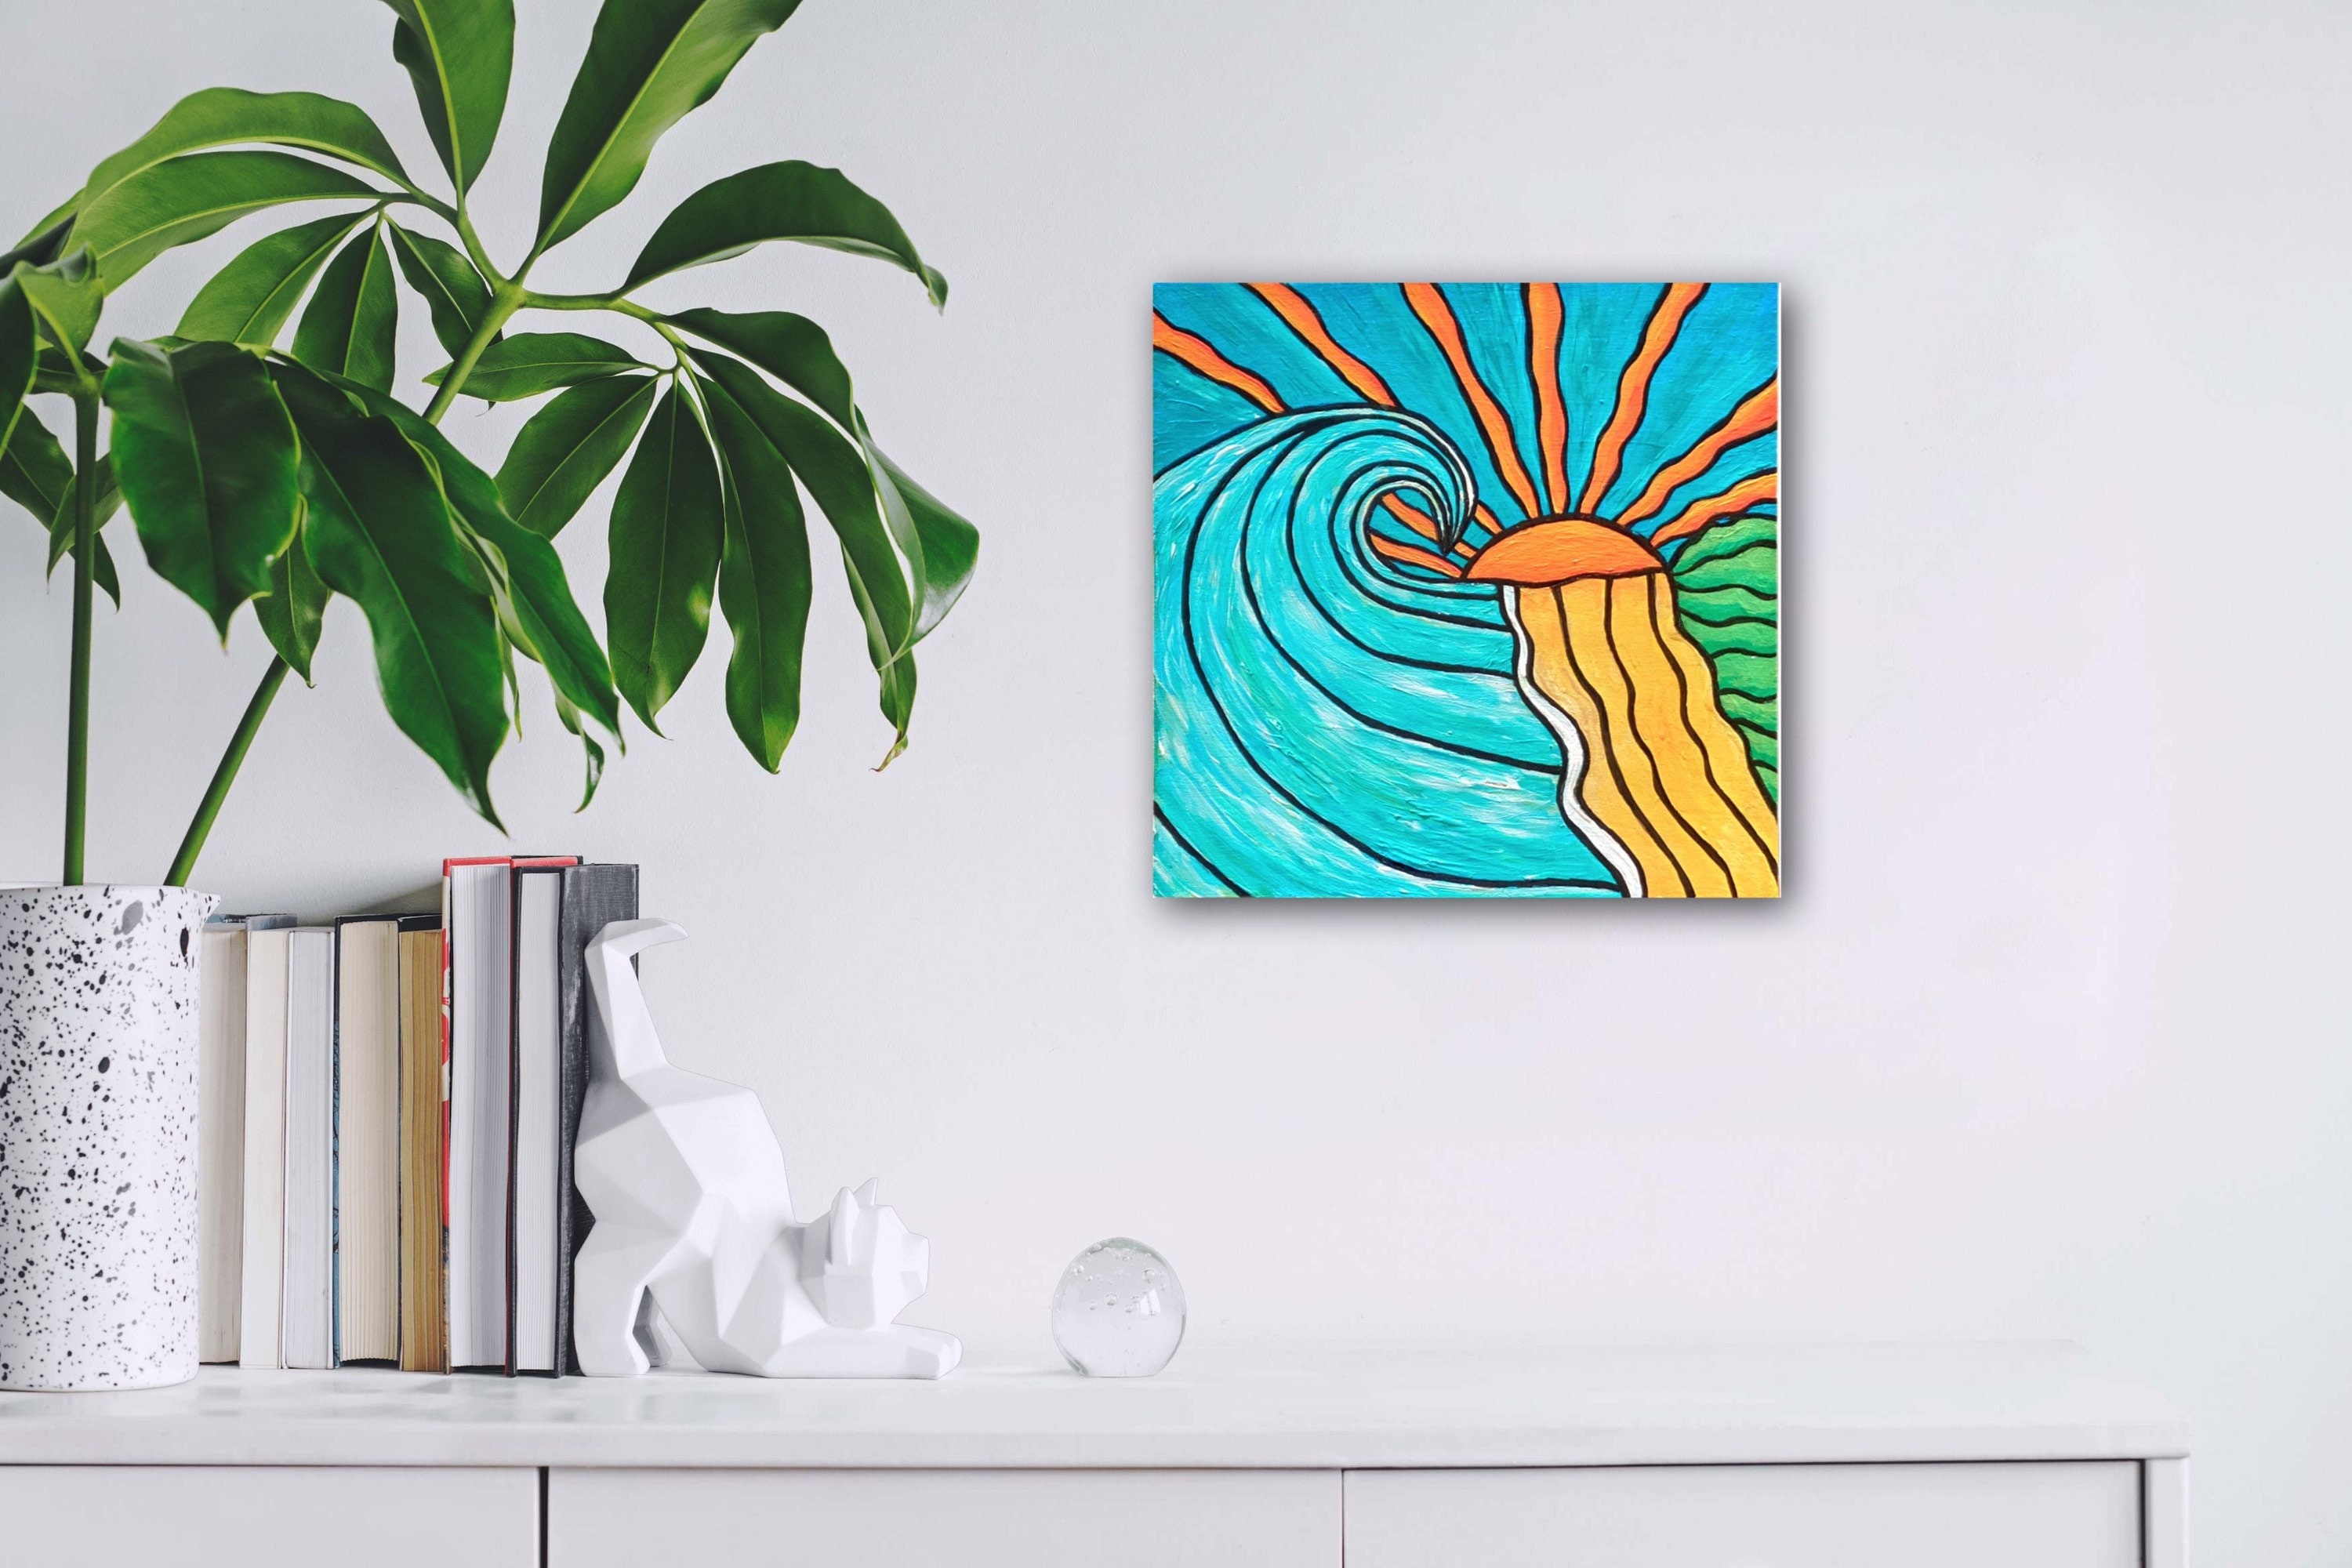 Whimsical Wave Painting - surf art - Maui art - wave wall art - Original  Acrylic Painting on 16x12” cotton stretched canvas